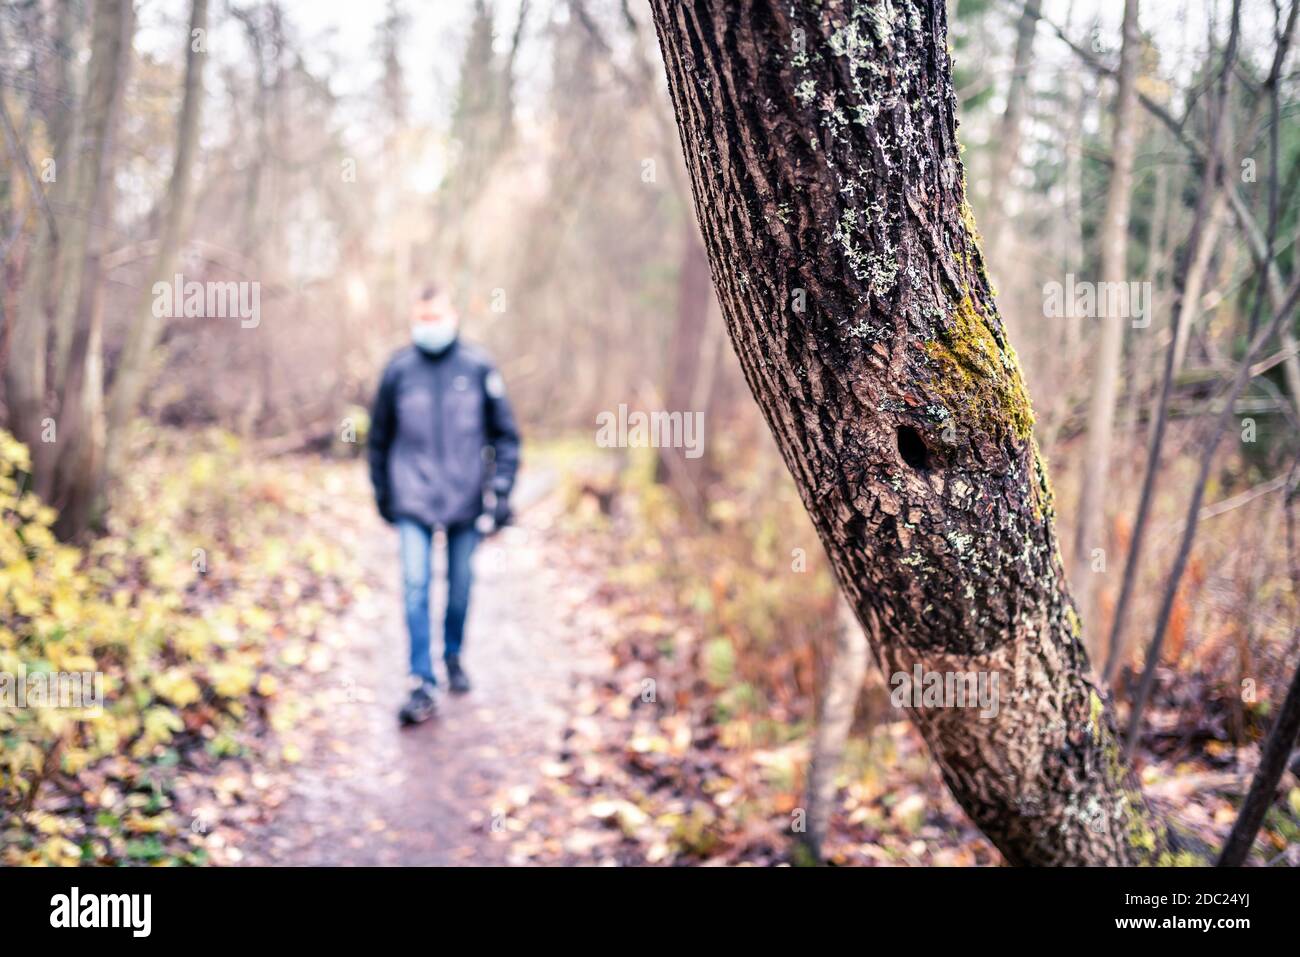 Corona depression, anxiety, loneliness and social distancing concept. Lonely sad man walking in forest alone during coronavirus isolation. Stock Photo